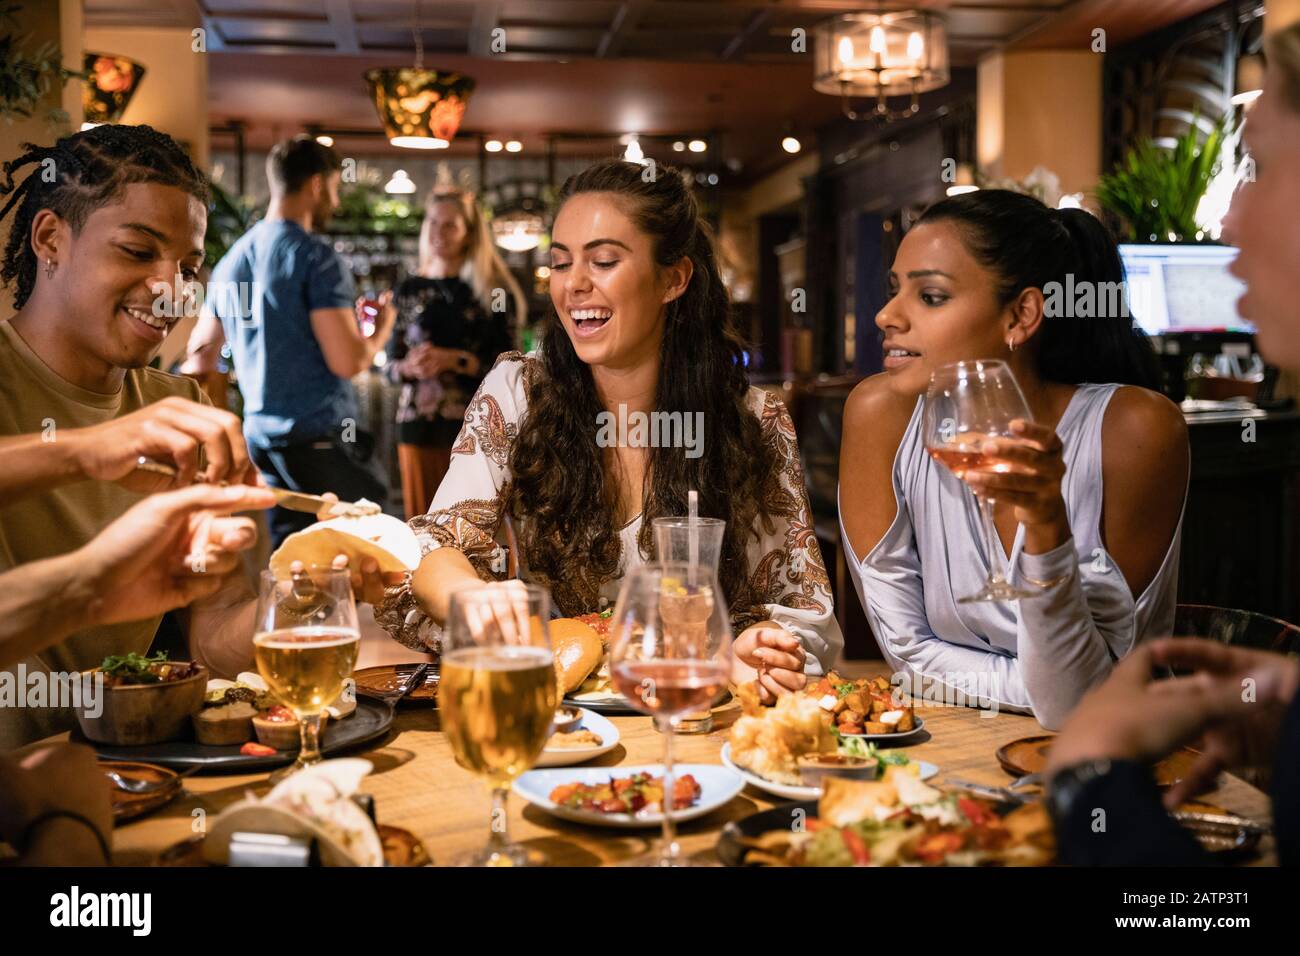 A mixed age range group of friends having a meal together at a restaurant. Stock Photo